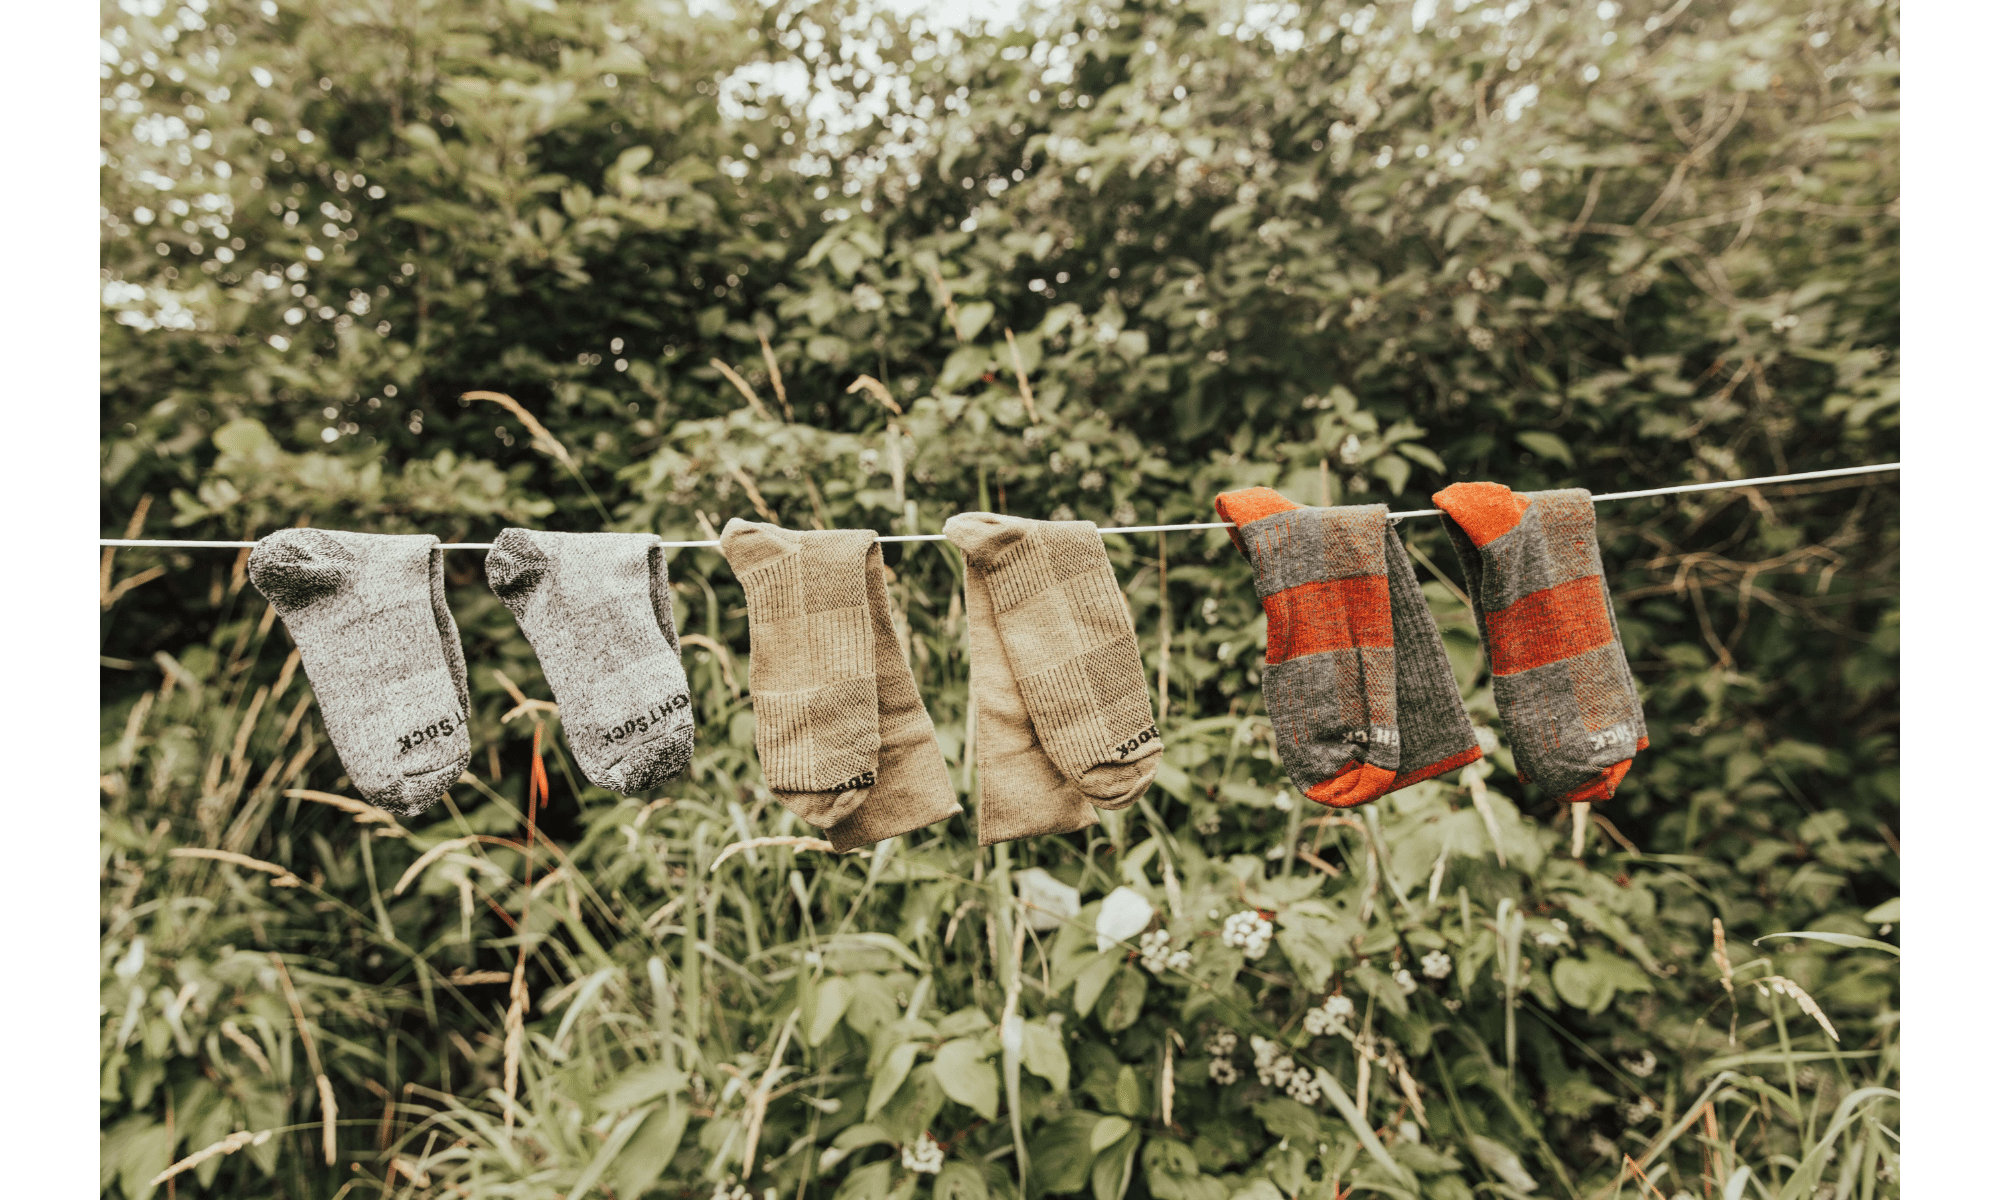 blister free socks on a clothes line